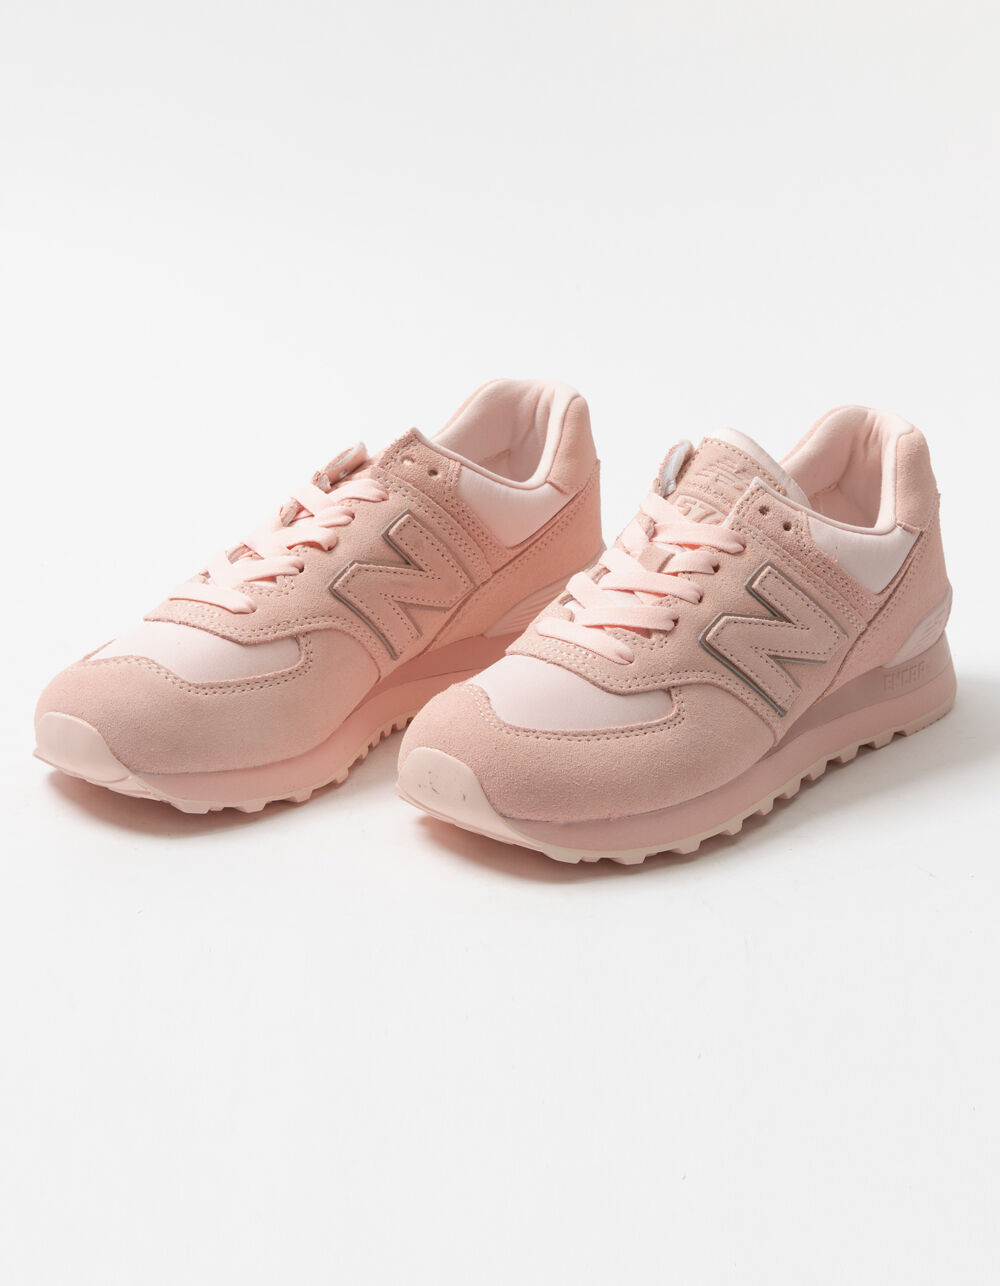 NEW BALANCE 574 Shoes - PINK |